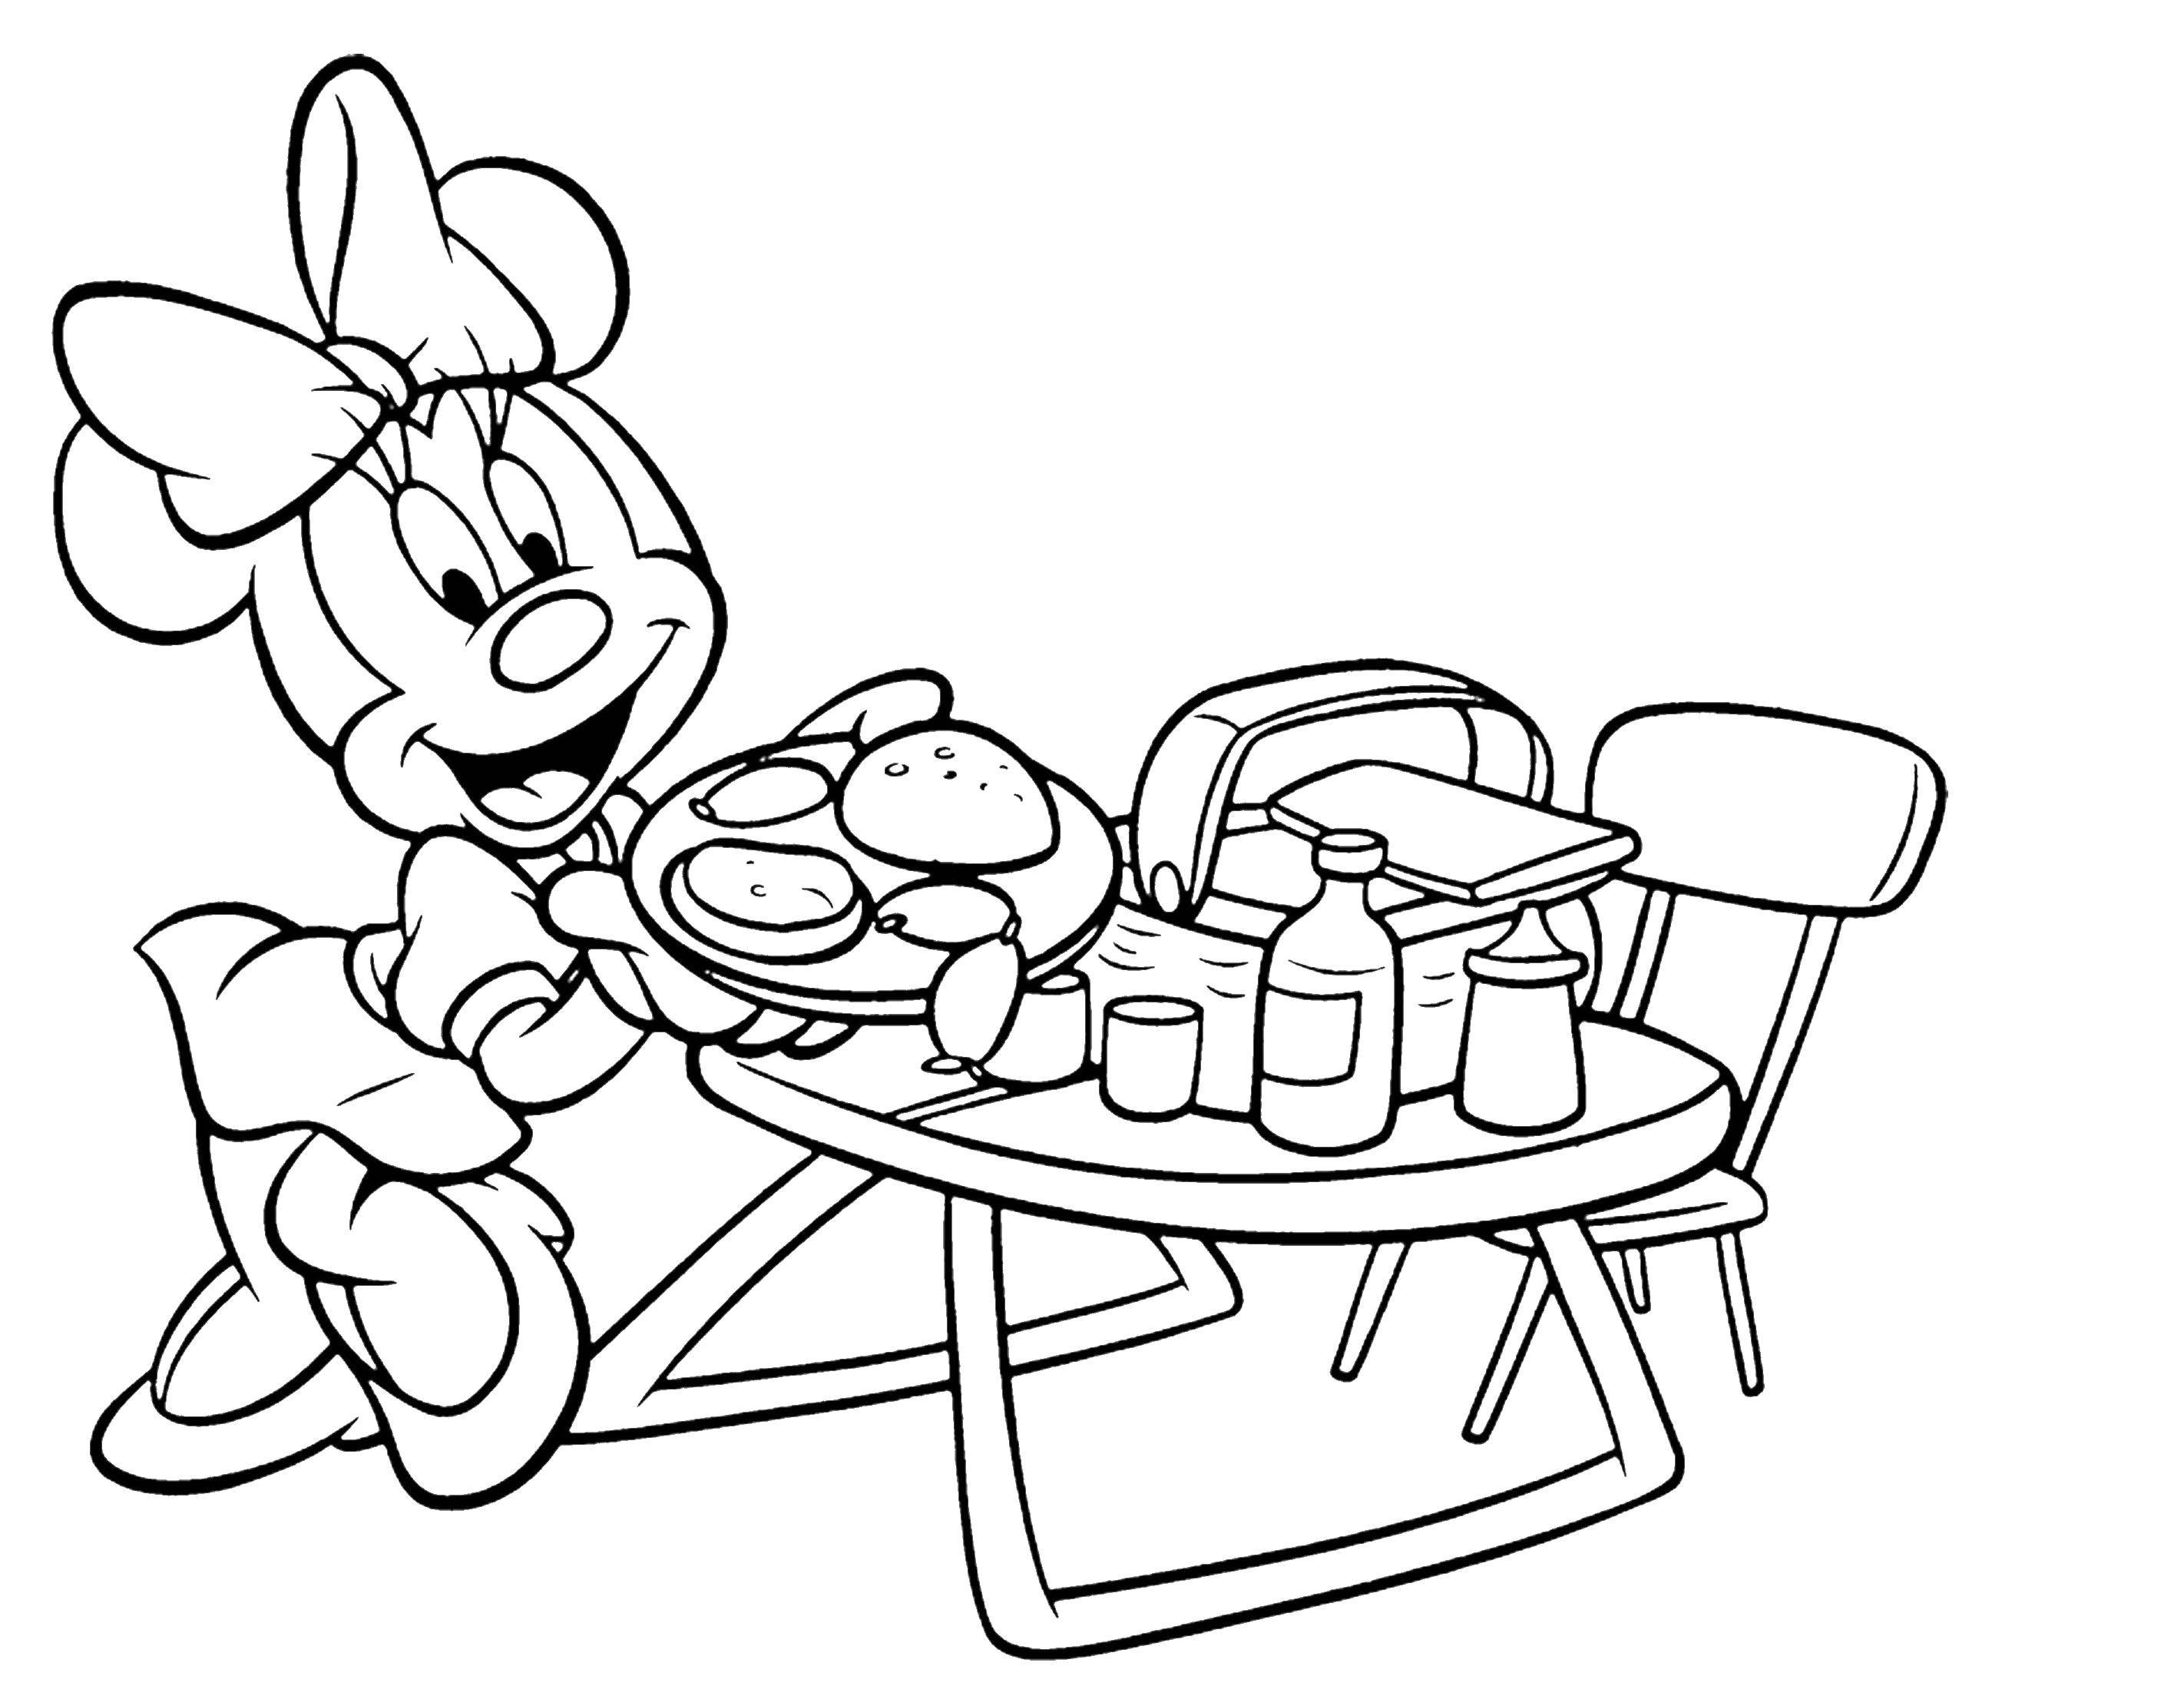 Coloring Minnie mouse on a picnic. Category cartoons. Tags:  Disney, Mickey Mouse, Minnie Mouse.